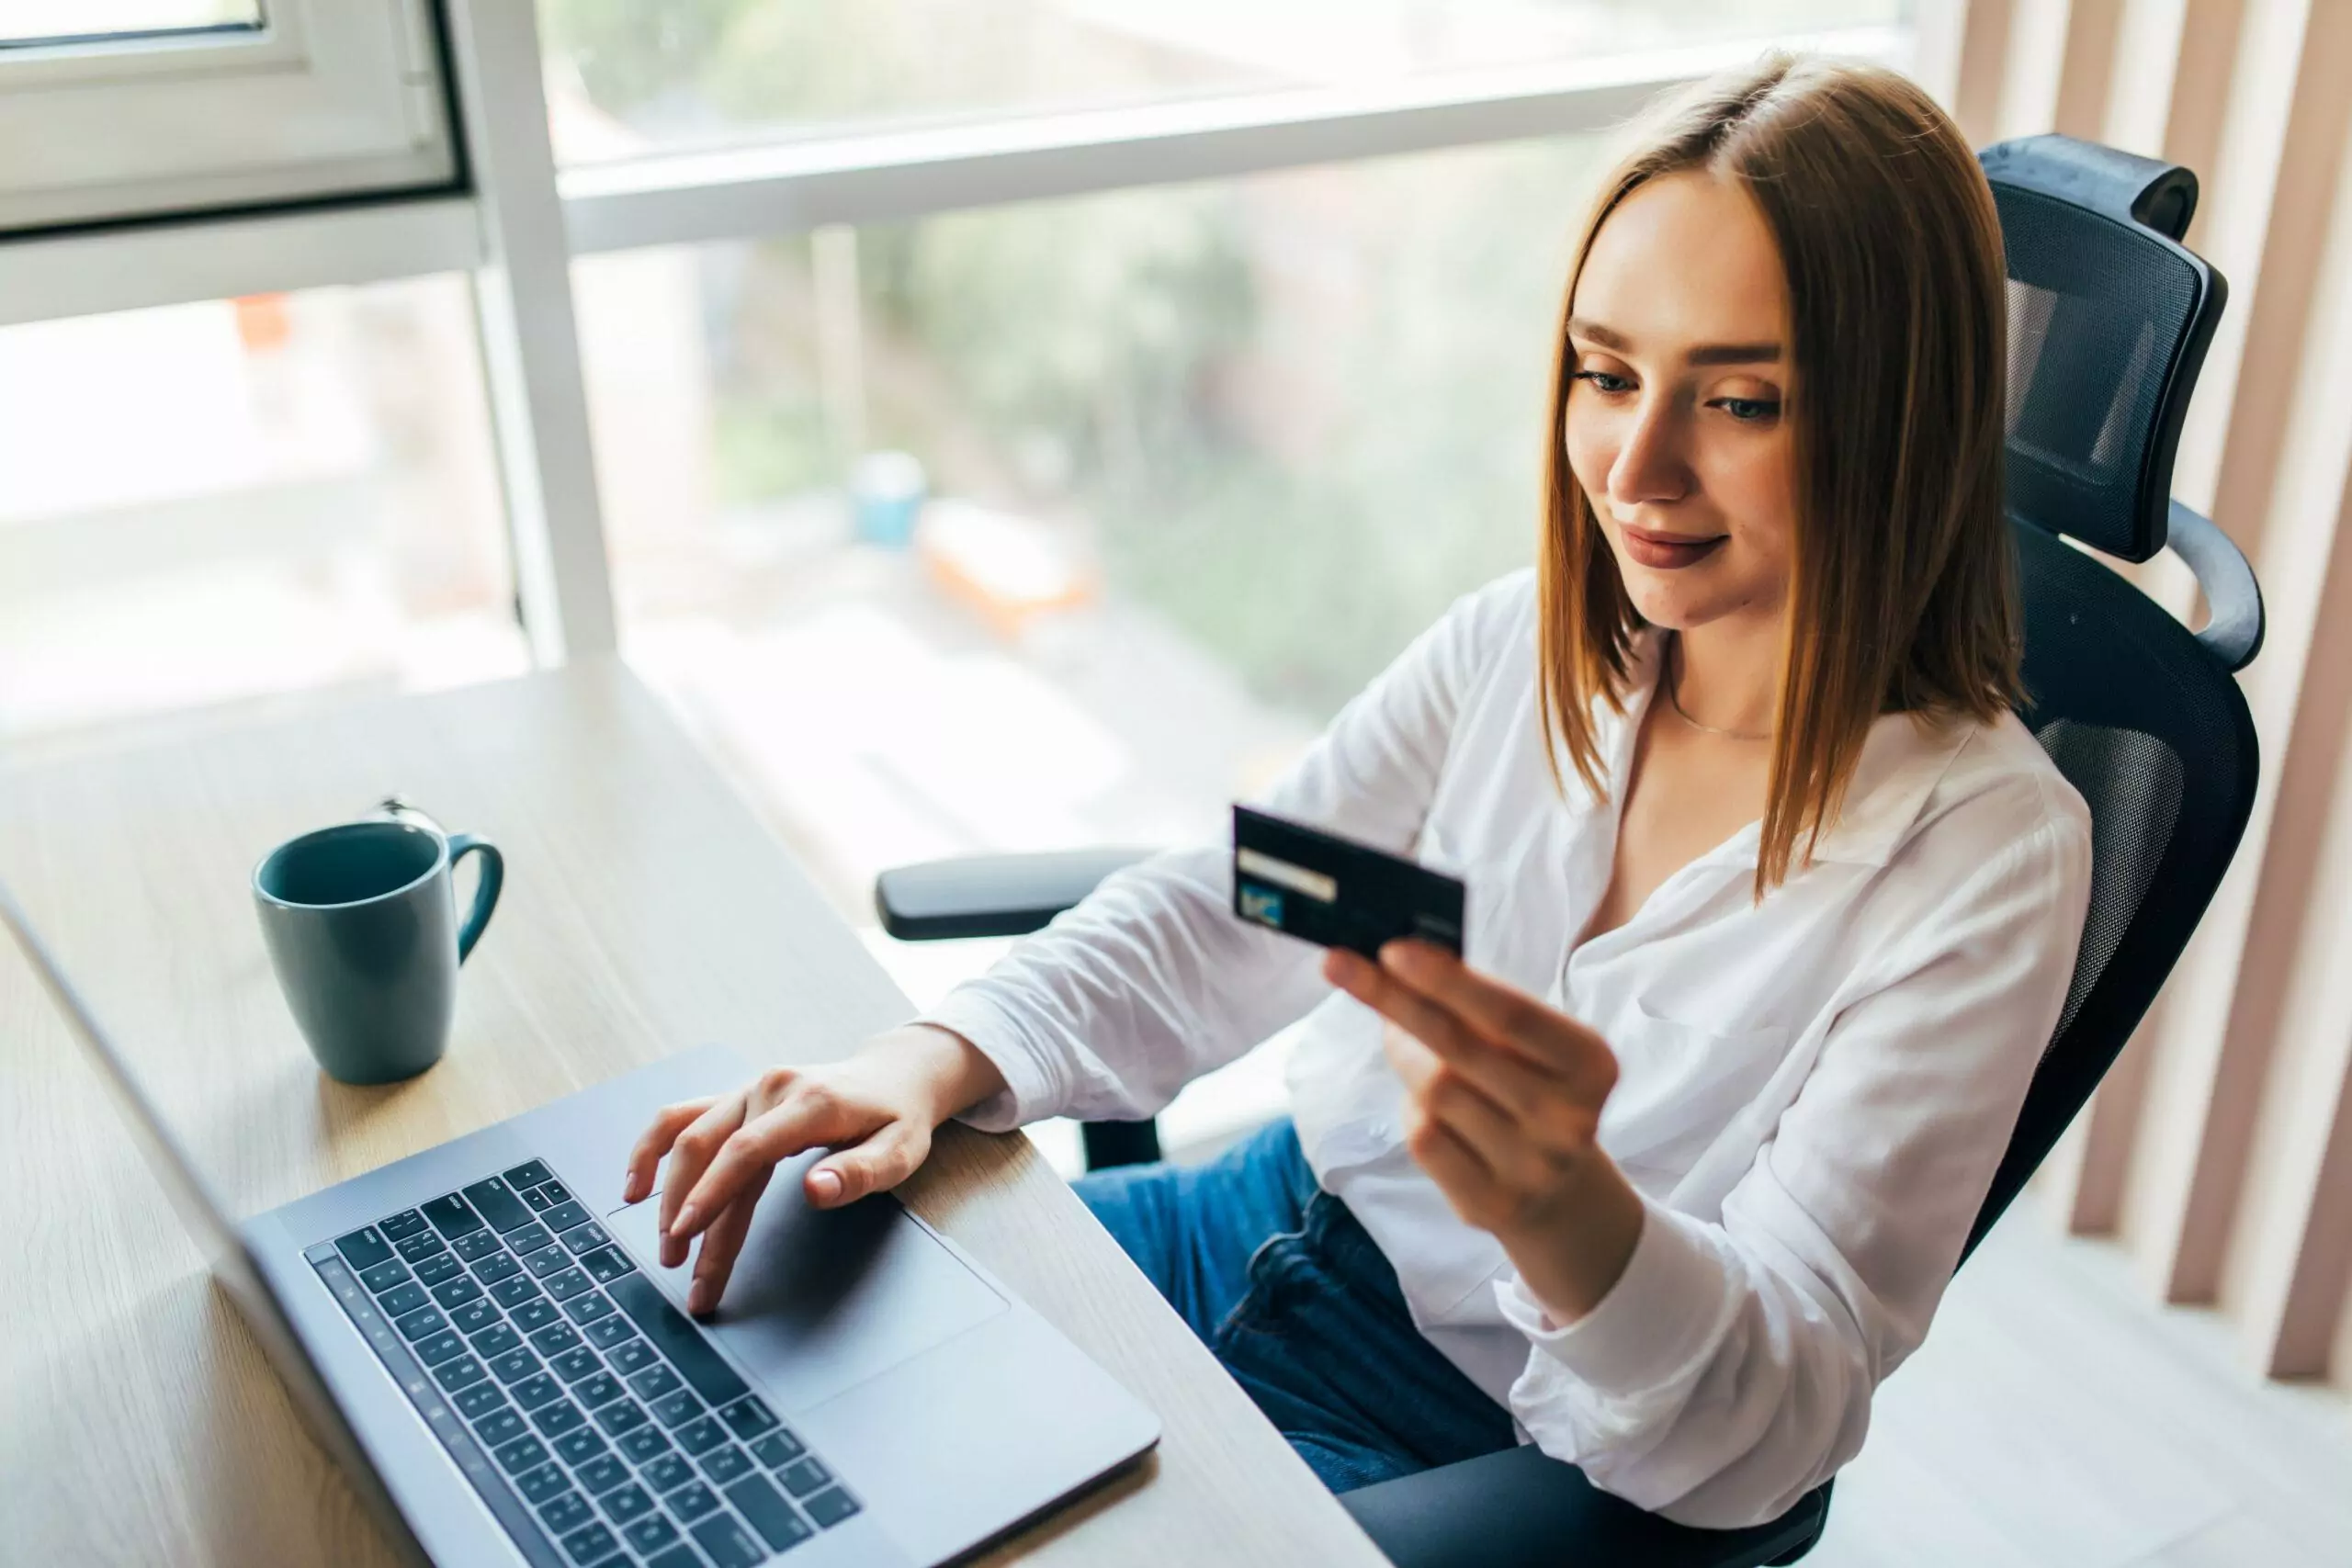 Portrait of a girl with shoulder-length sleek hair holding credit card and using laptop